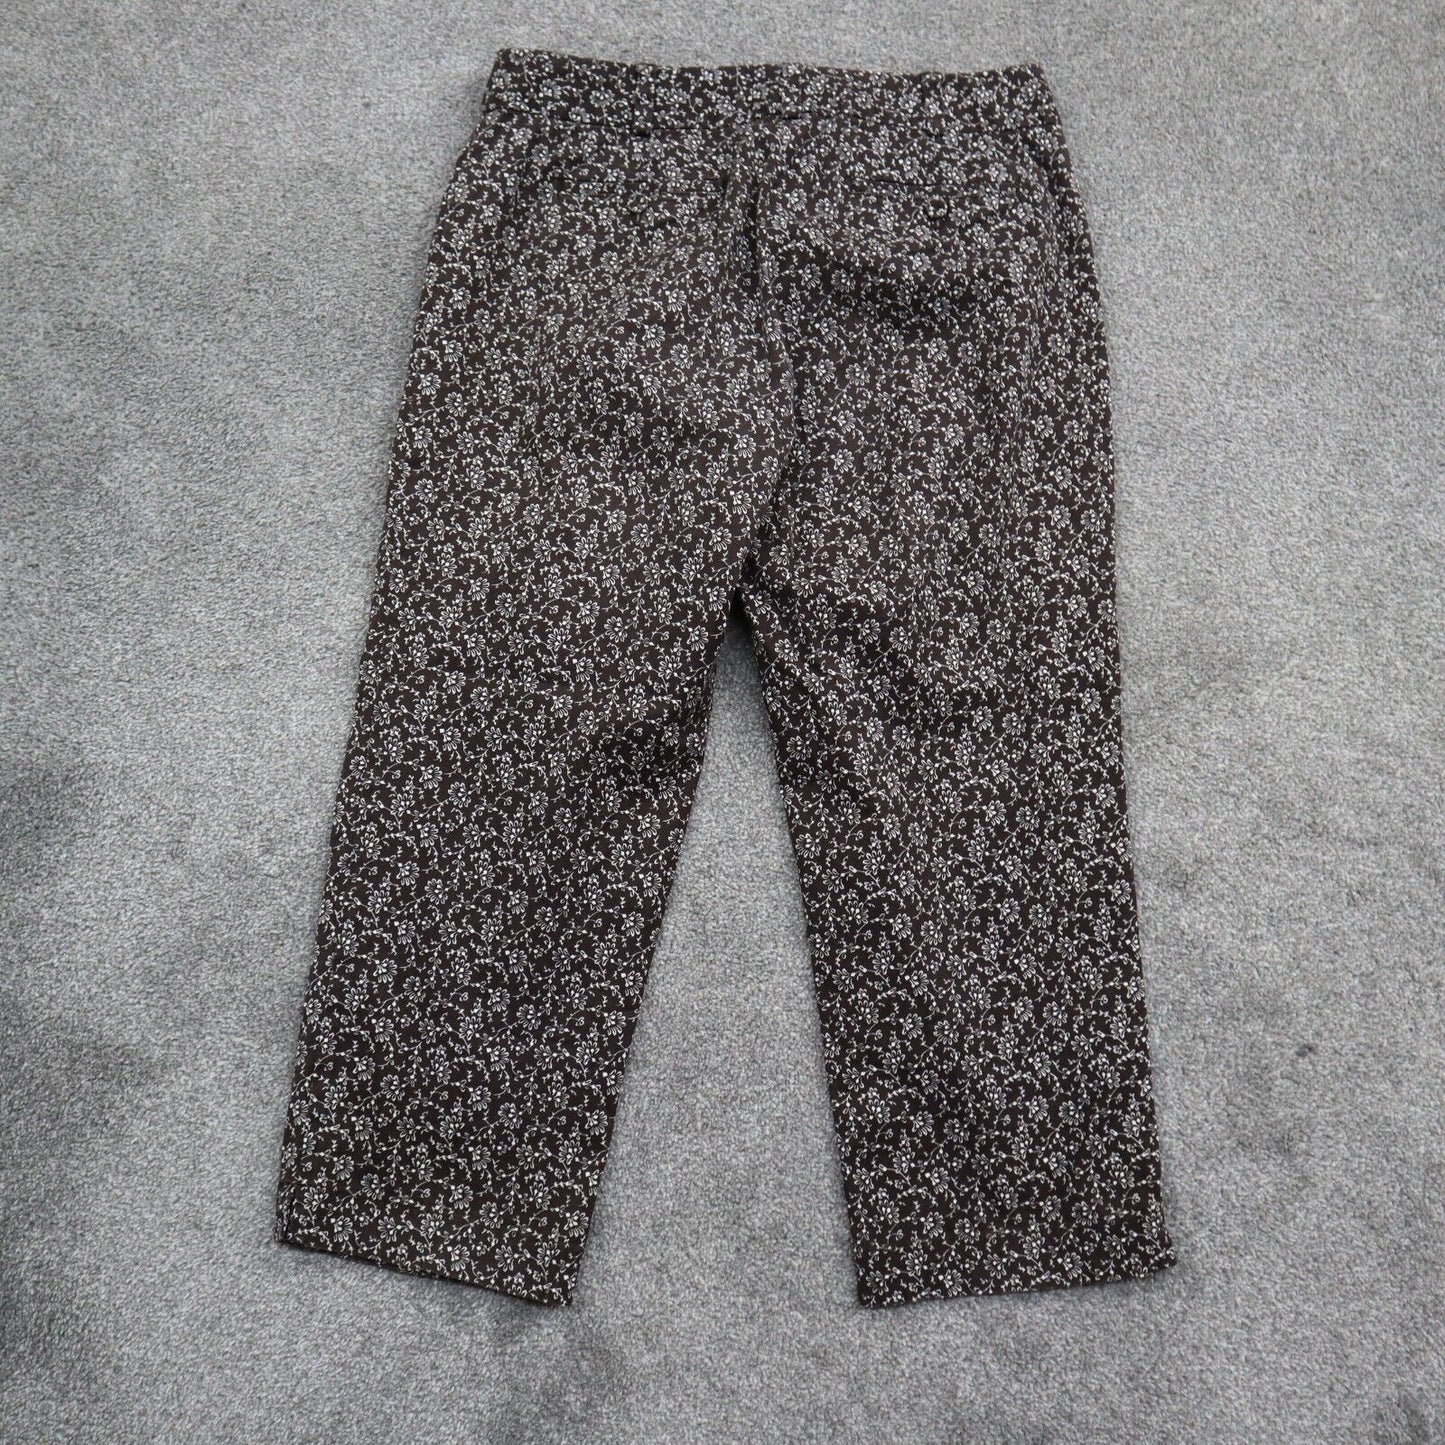 Talbots Womens Straight Leg Pant Mid Rise Flat Front Floral Brown White Size 8P